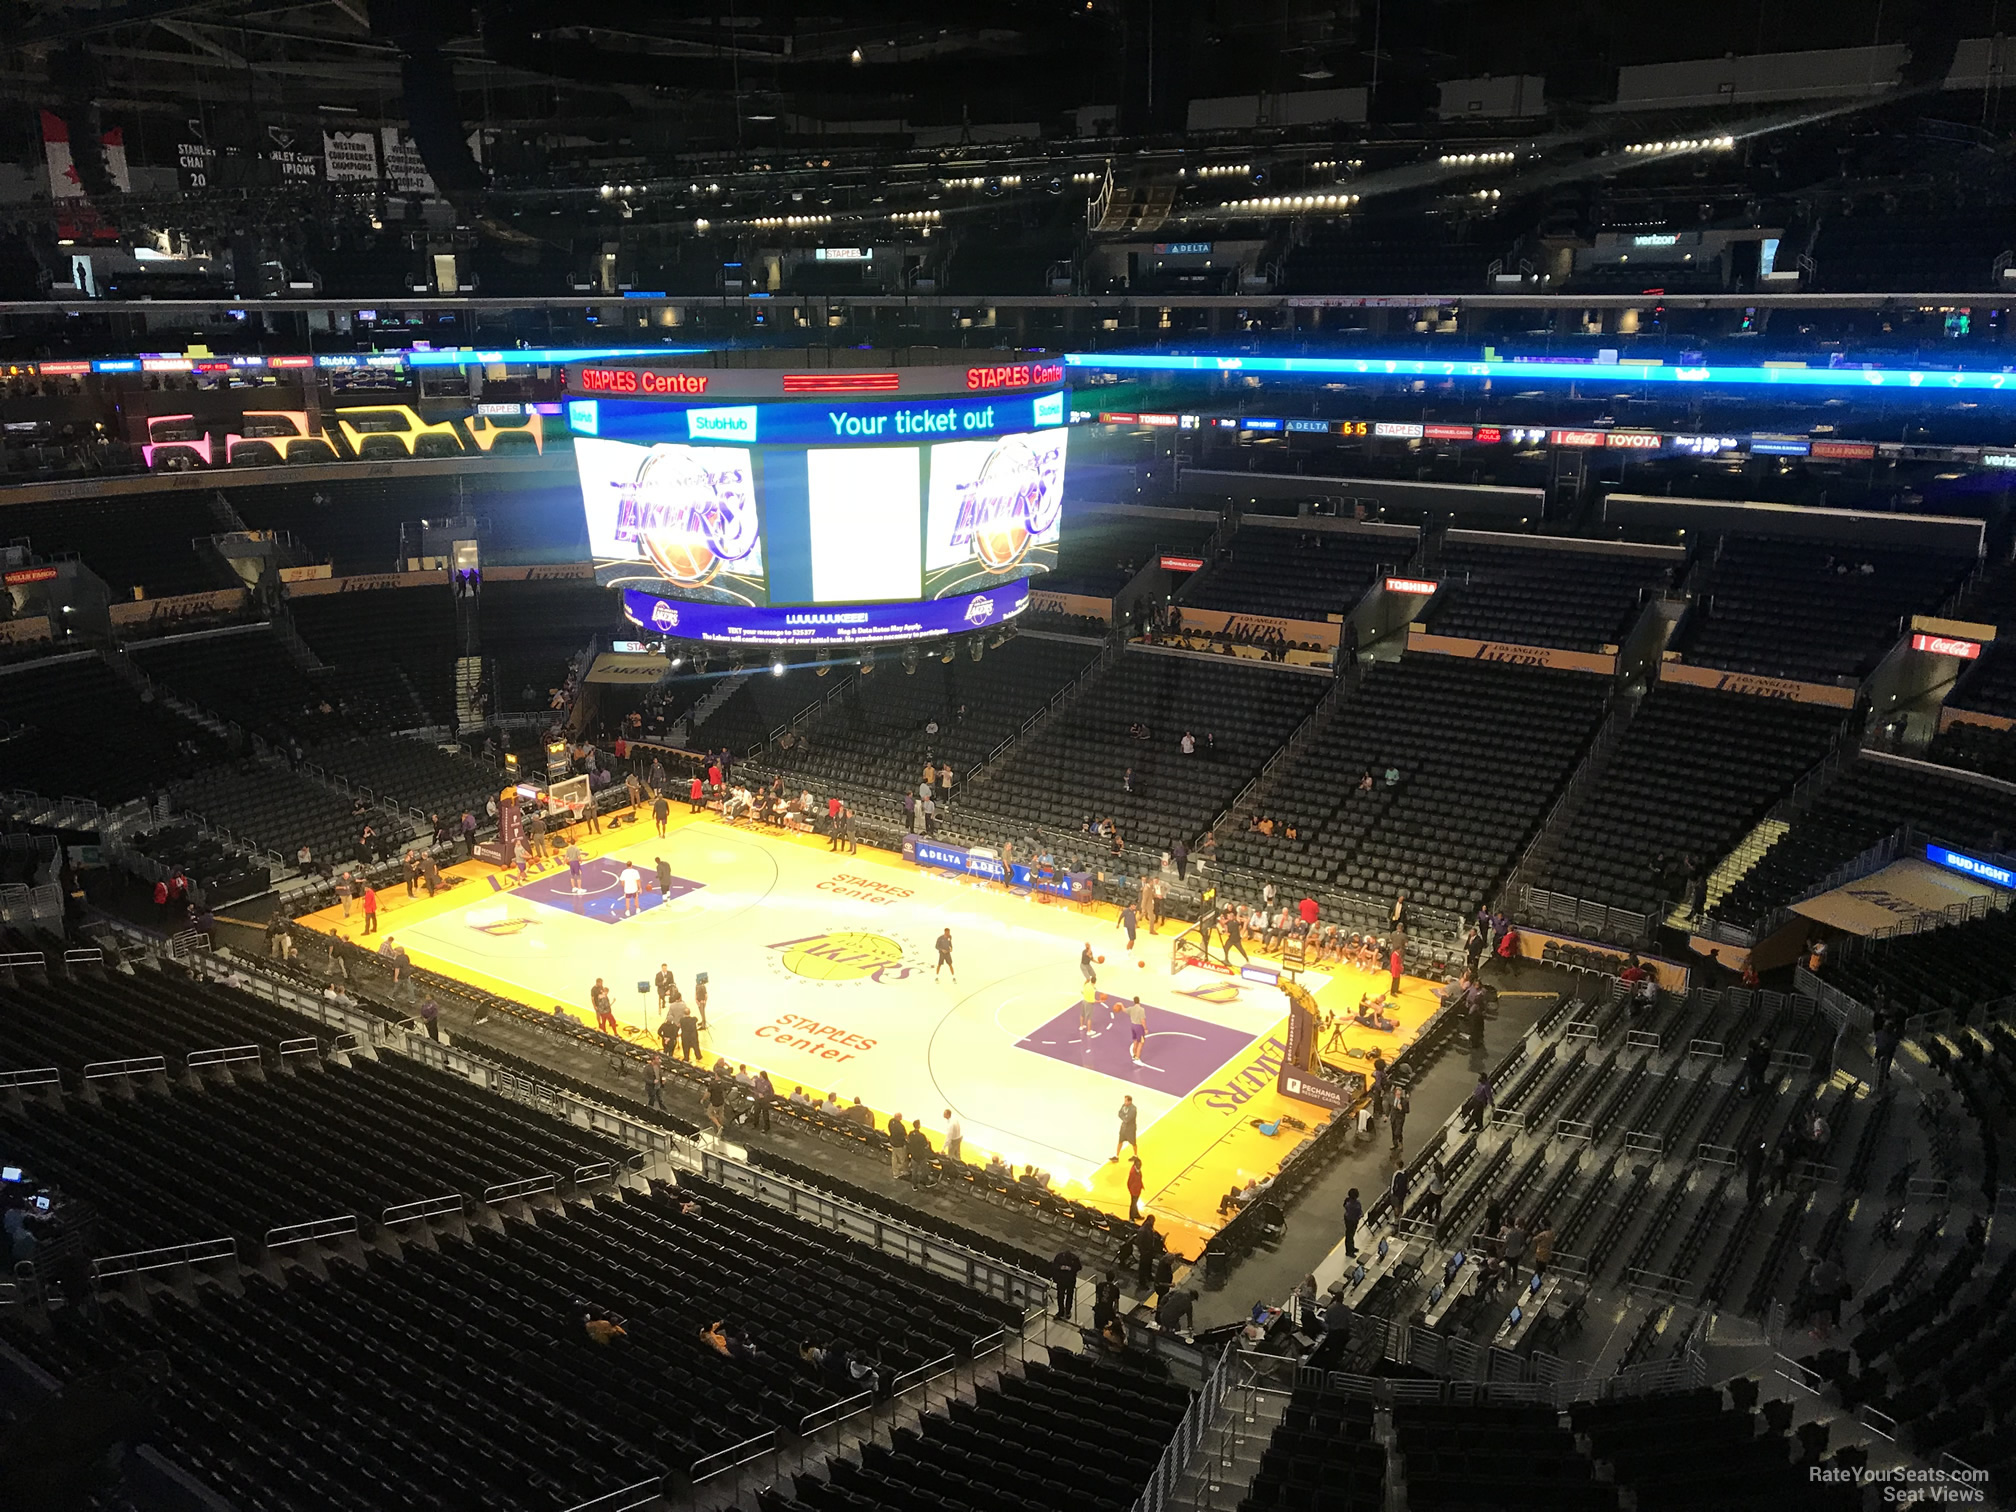 Staples Center Section 315 - Clippers/Lakers - RateYourSeats.com2016 x 1512